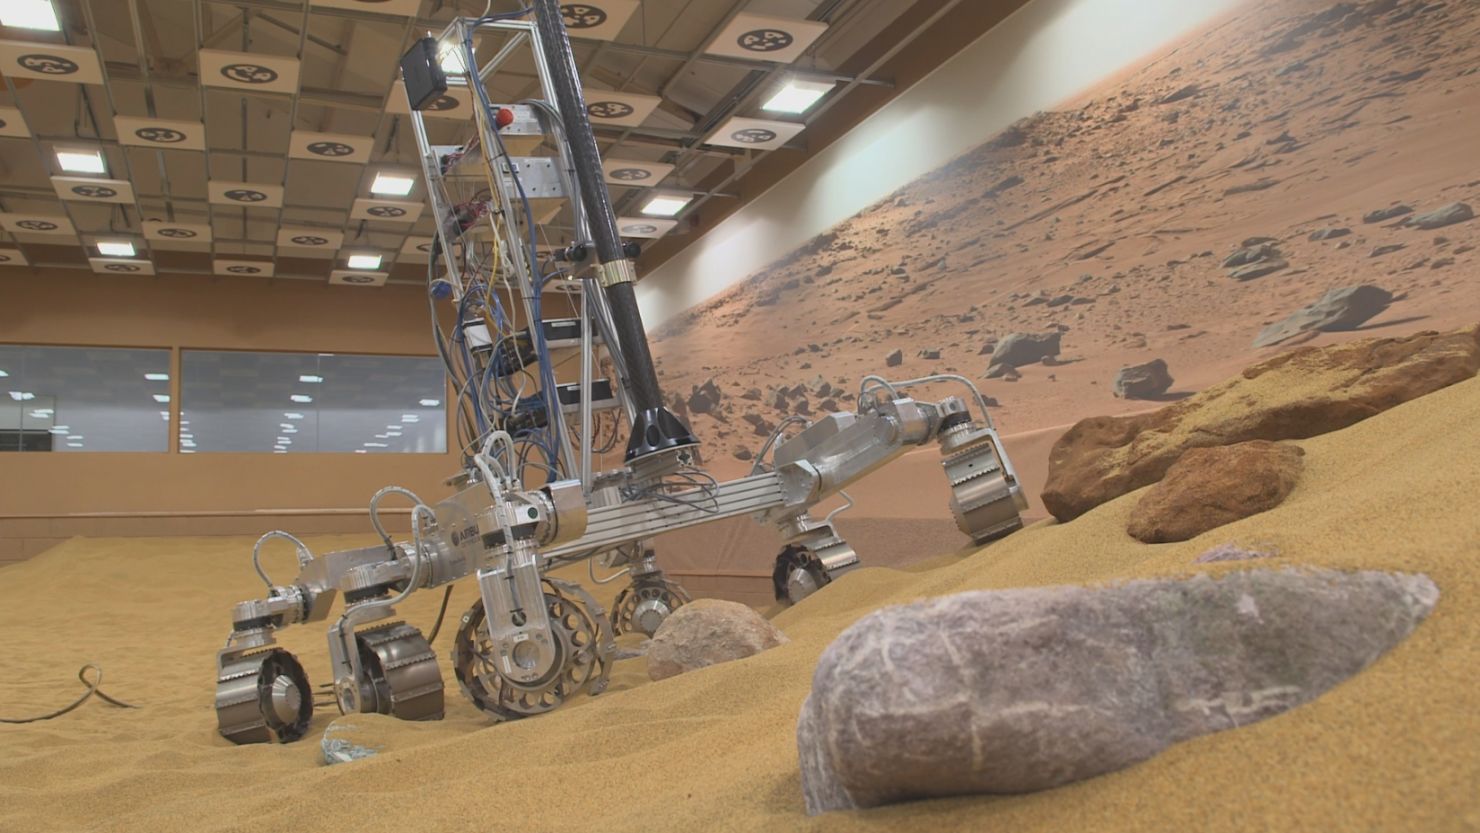 The "Mars Yard" is being used to help develop the European Space Agency's future Mars rover.